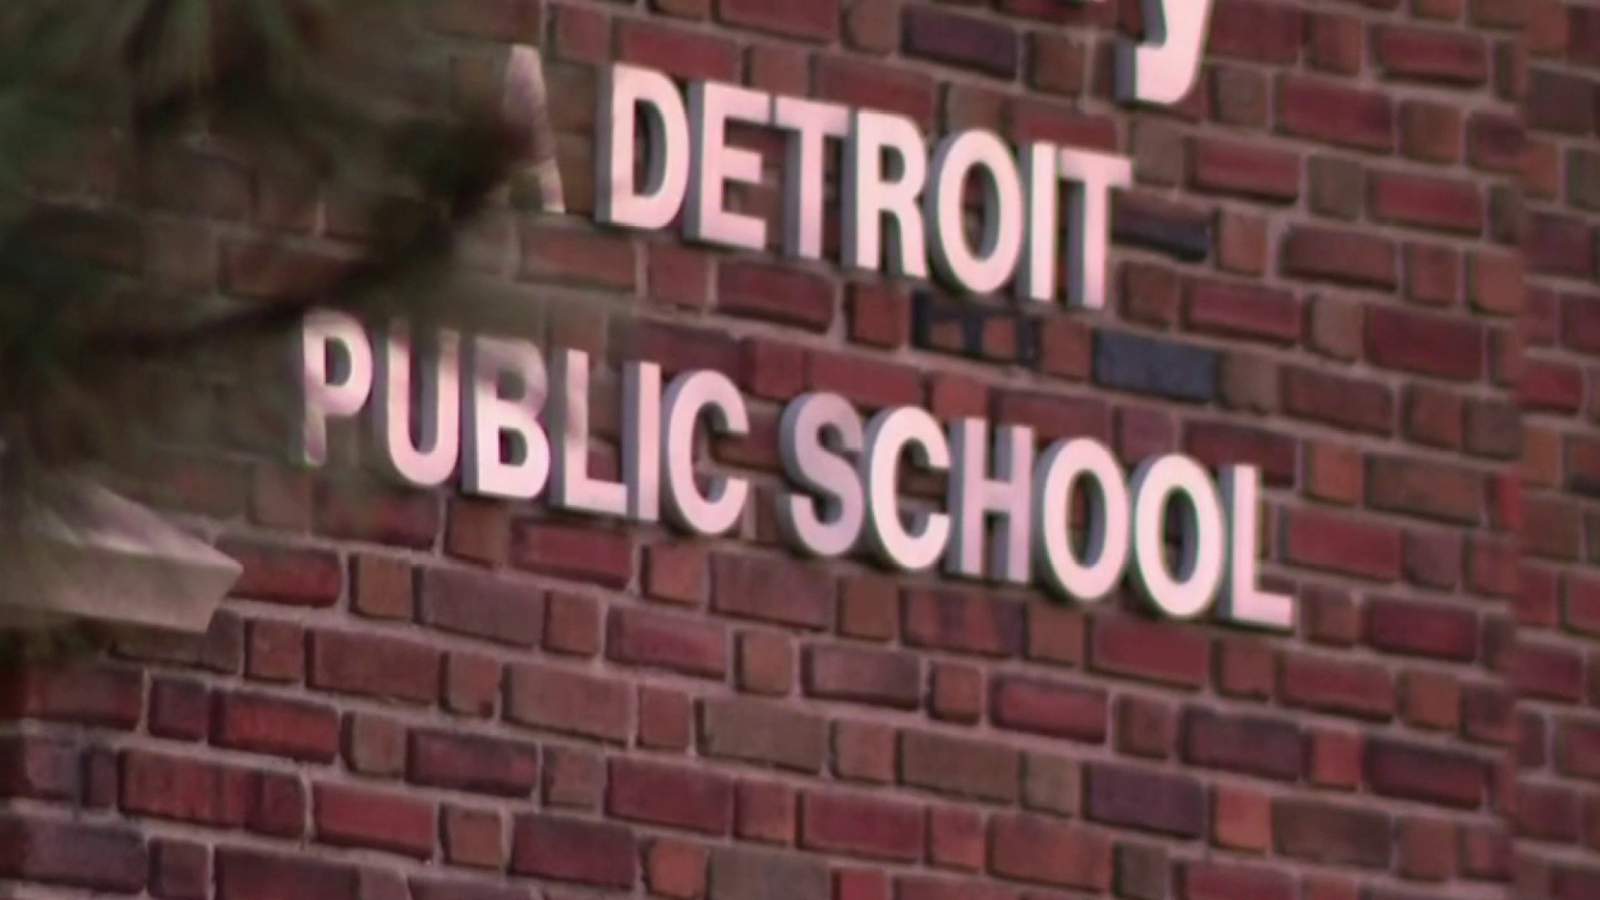 detroit-public-schools-roll-out-distance-learning-plan-amid-covid-19-outbreak